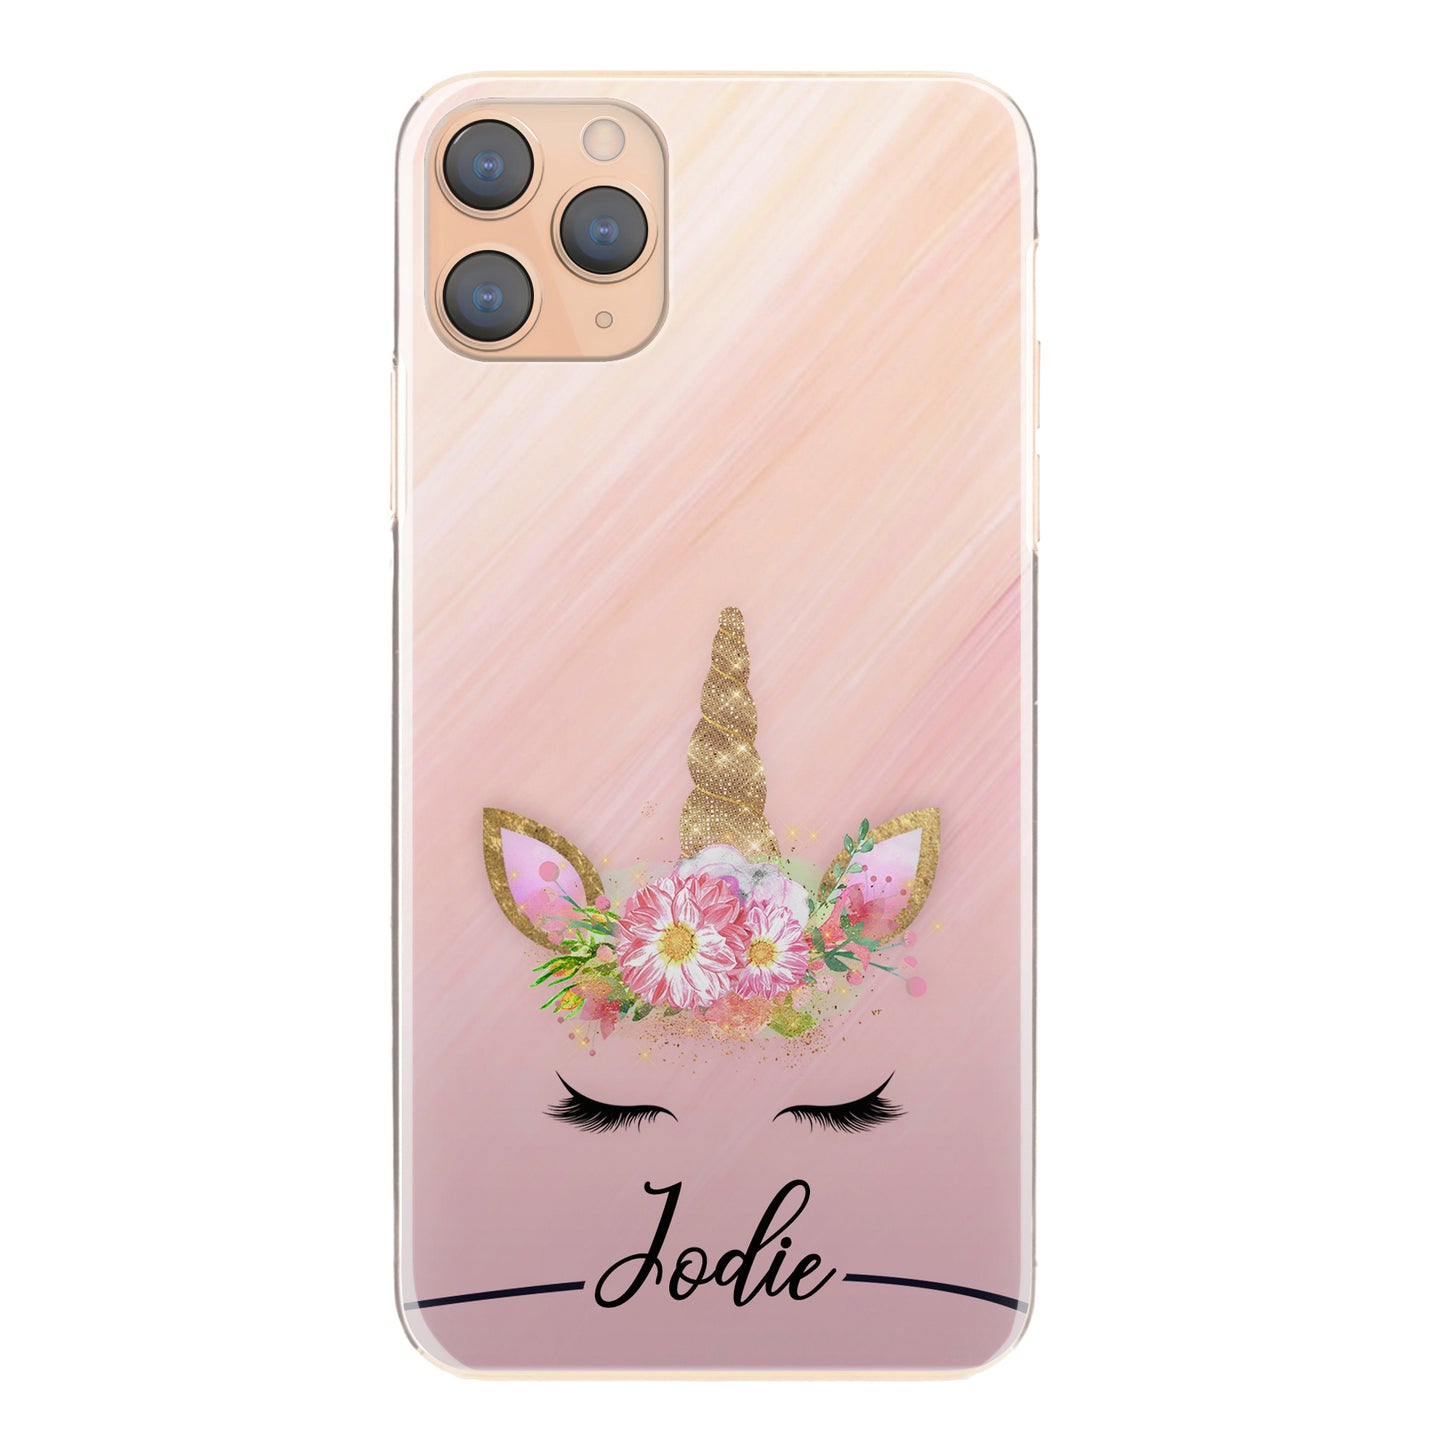 Personalised Motorola Phone Hard Case with Gold Floral Unicorn and Text on Pink